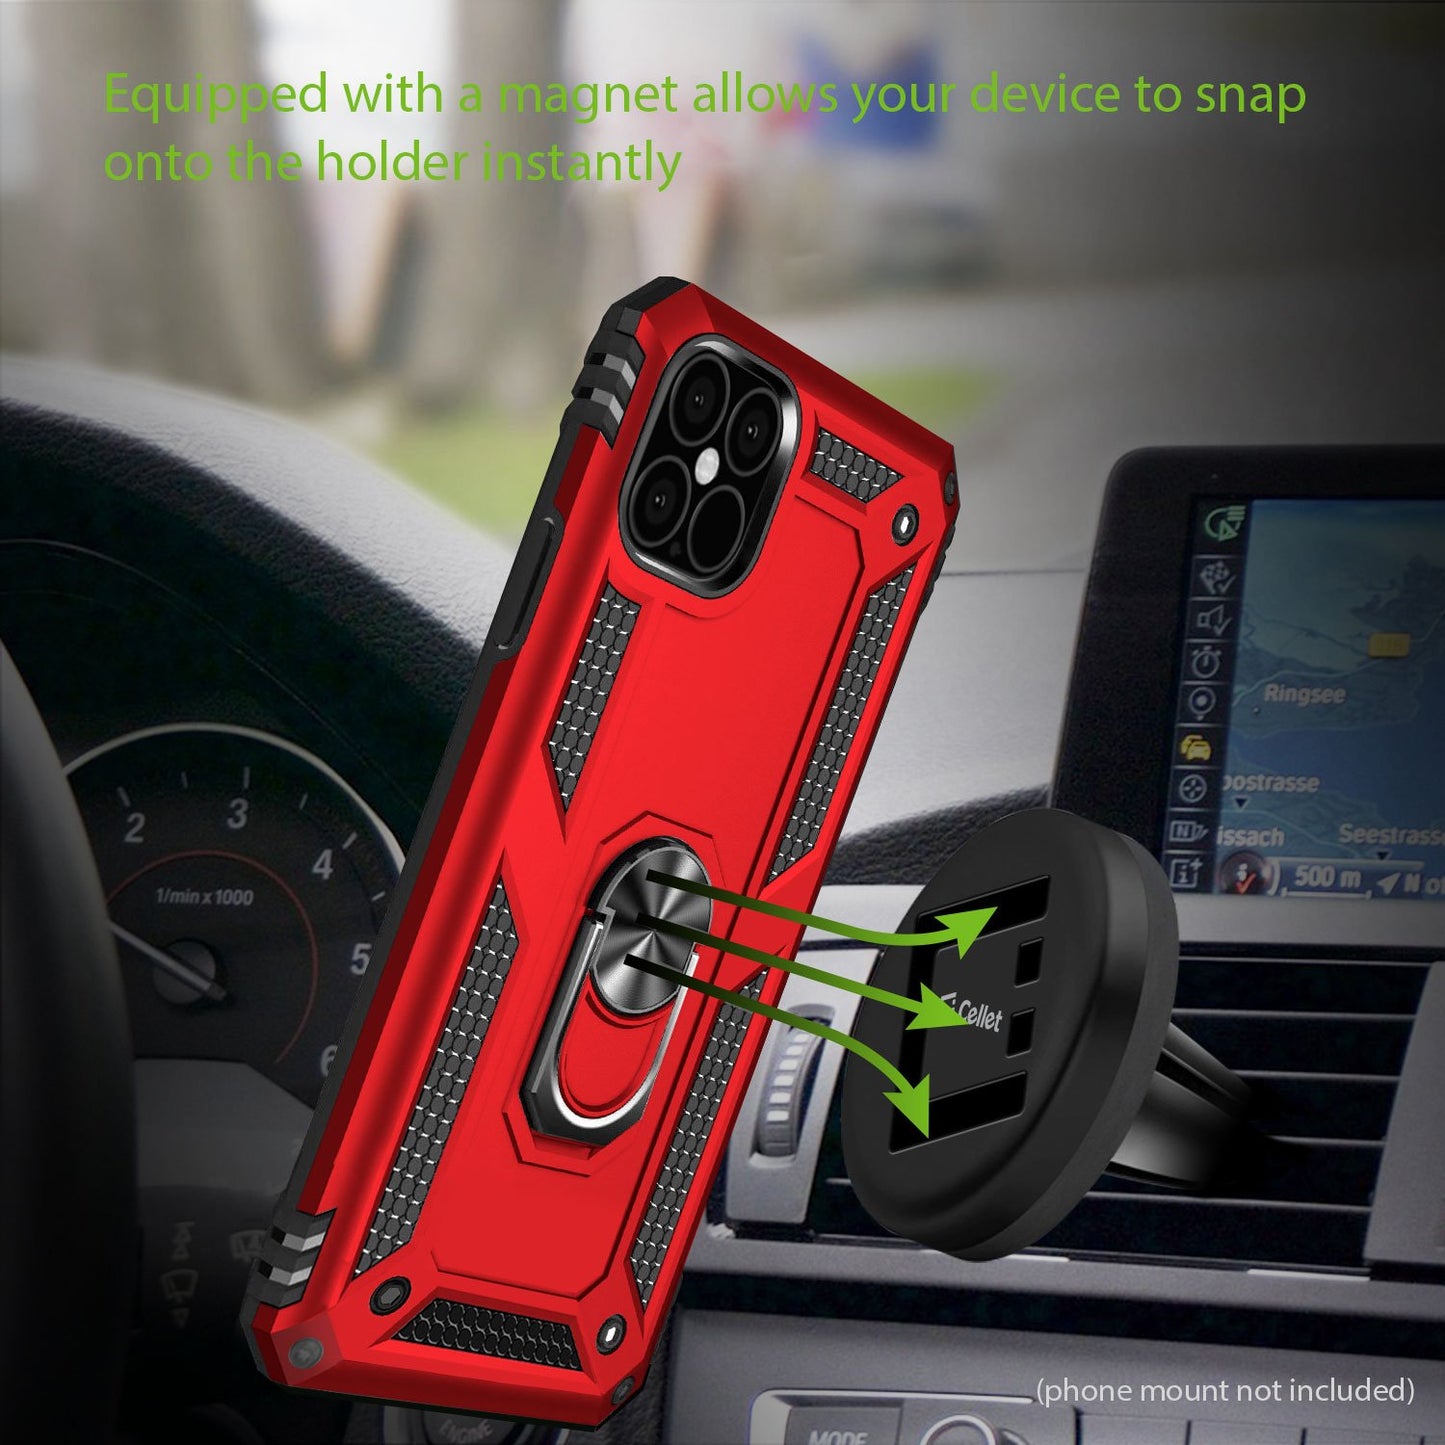 CCIPH12IFRD - iPhone 12 Mini Combo Case, Shockproof Case with Built in Ring, Kickstand and Magnet for Car Mounts Compatible to Apple iPhone 12 Mini